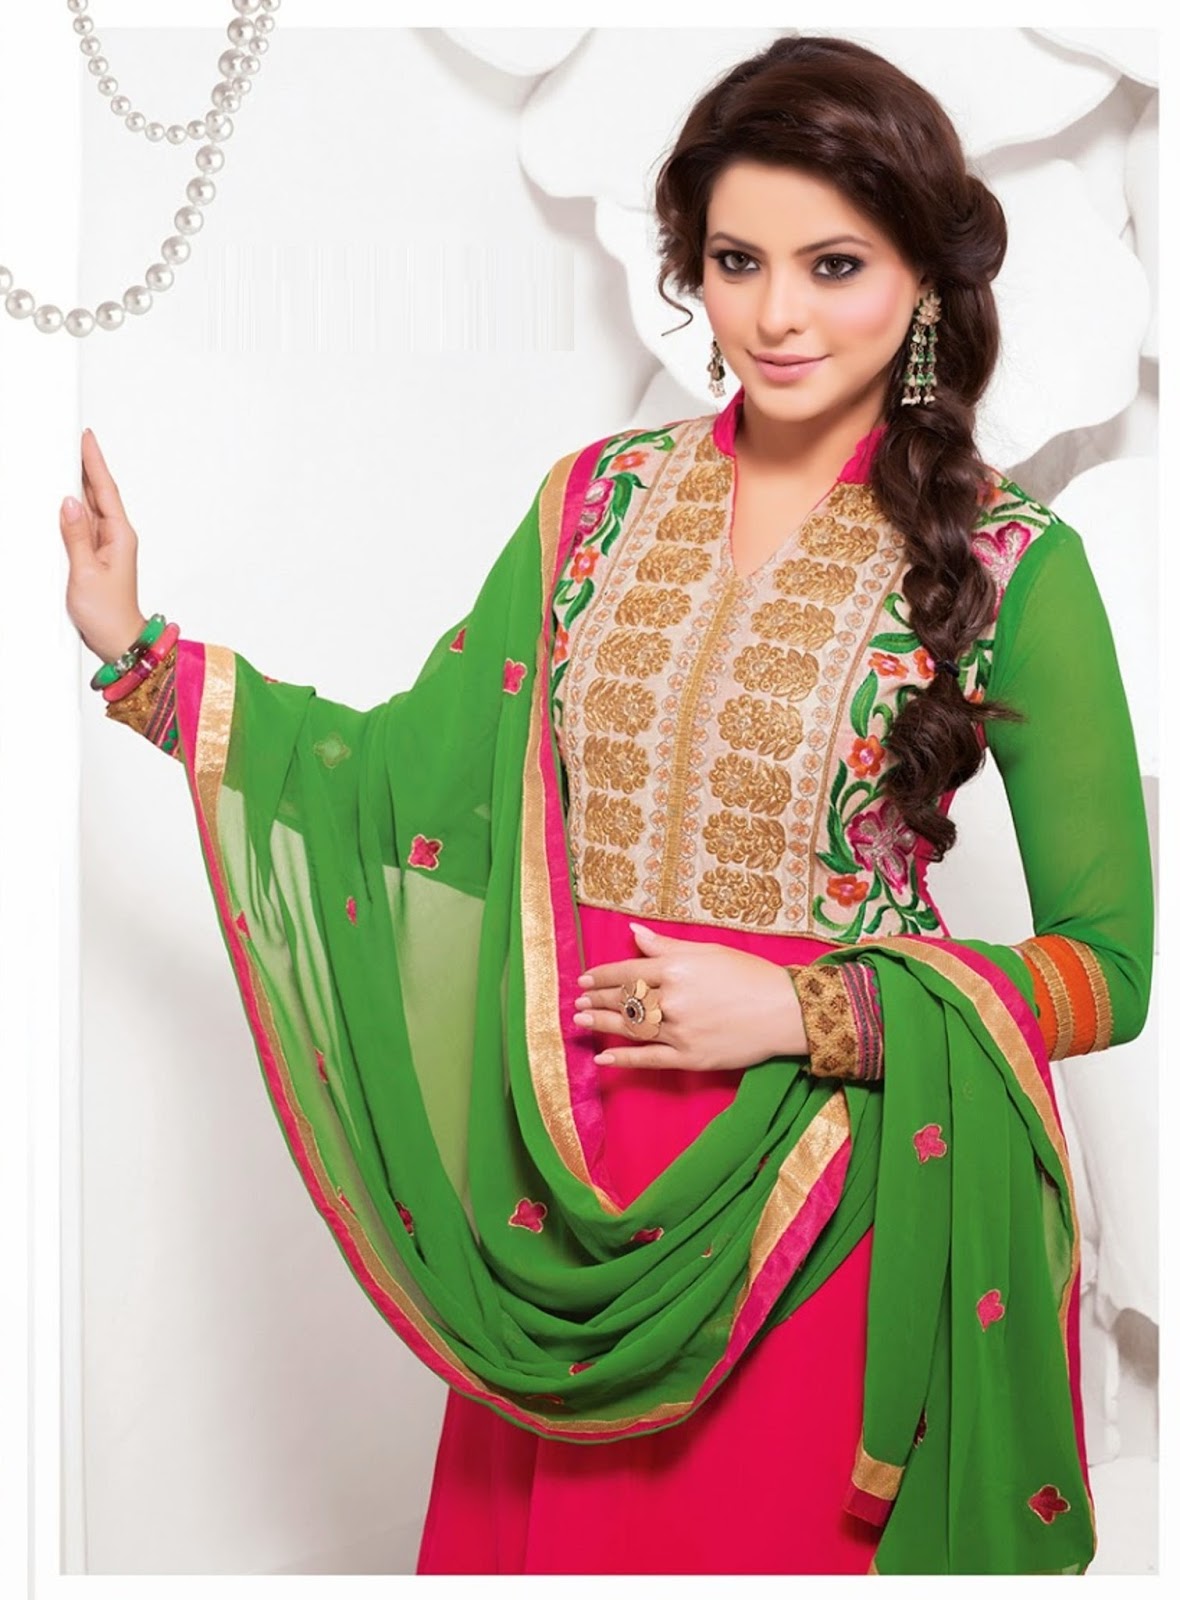 Very Beautiful And Smart Aamna Sharif Image Download - FREE ALL HD ...